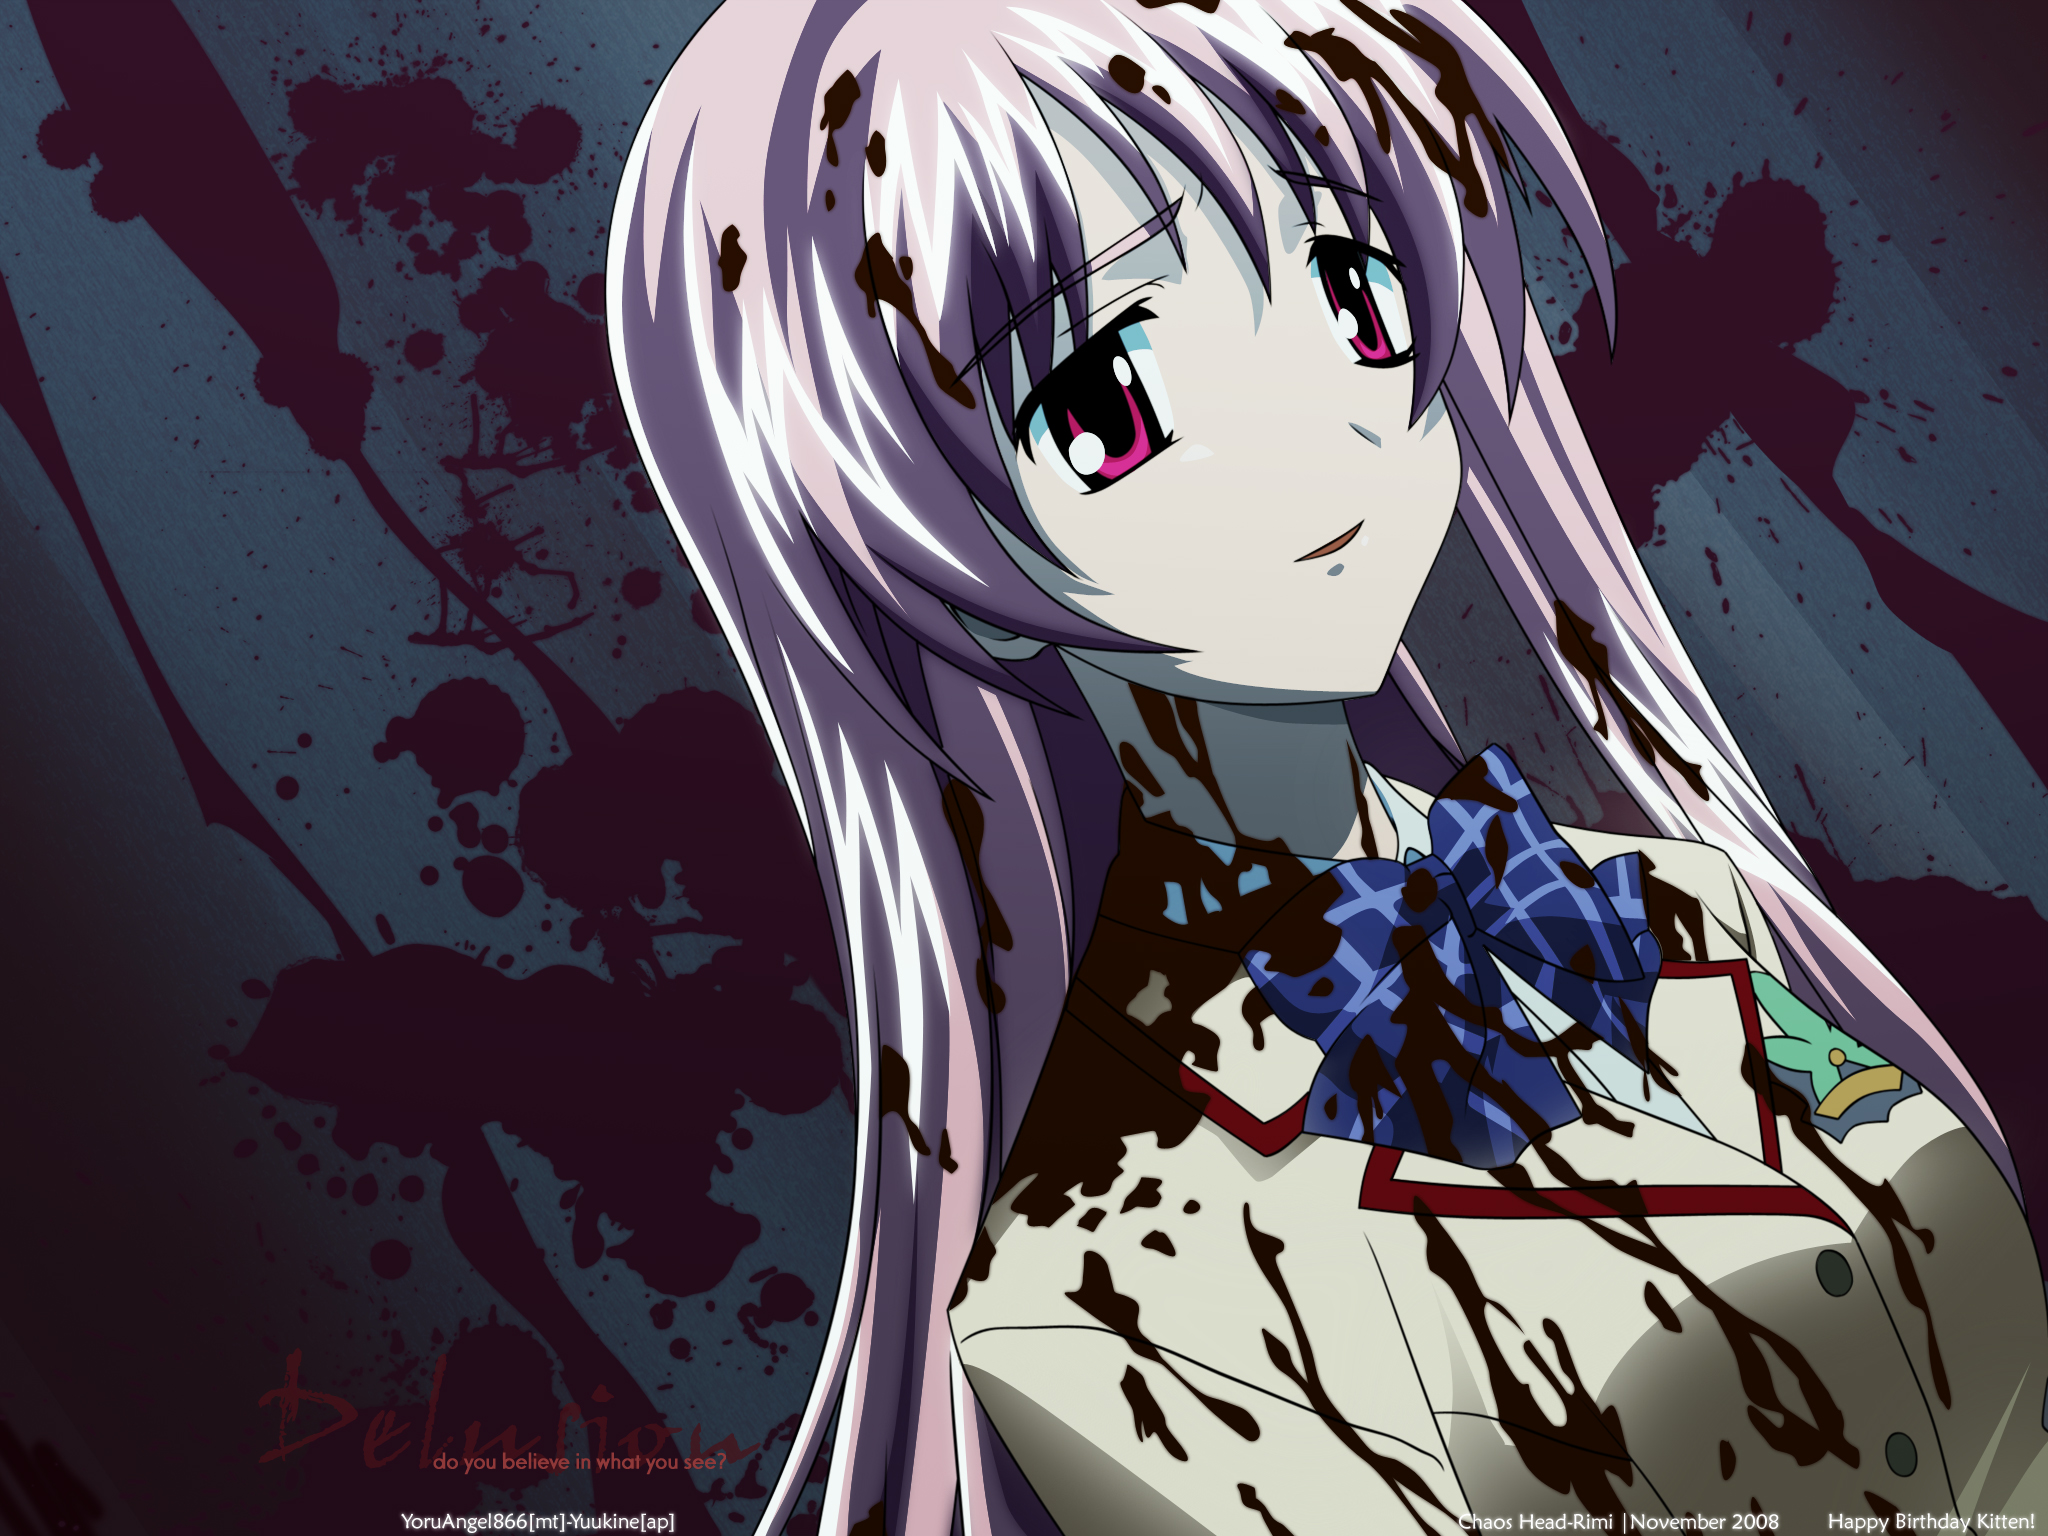 Anime Chaos;Head HD Wallpaper | Background Image